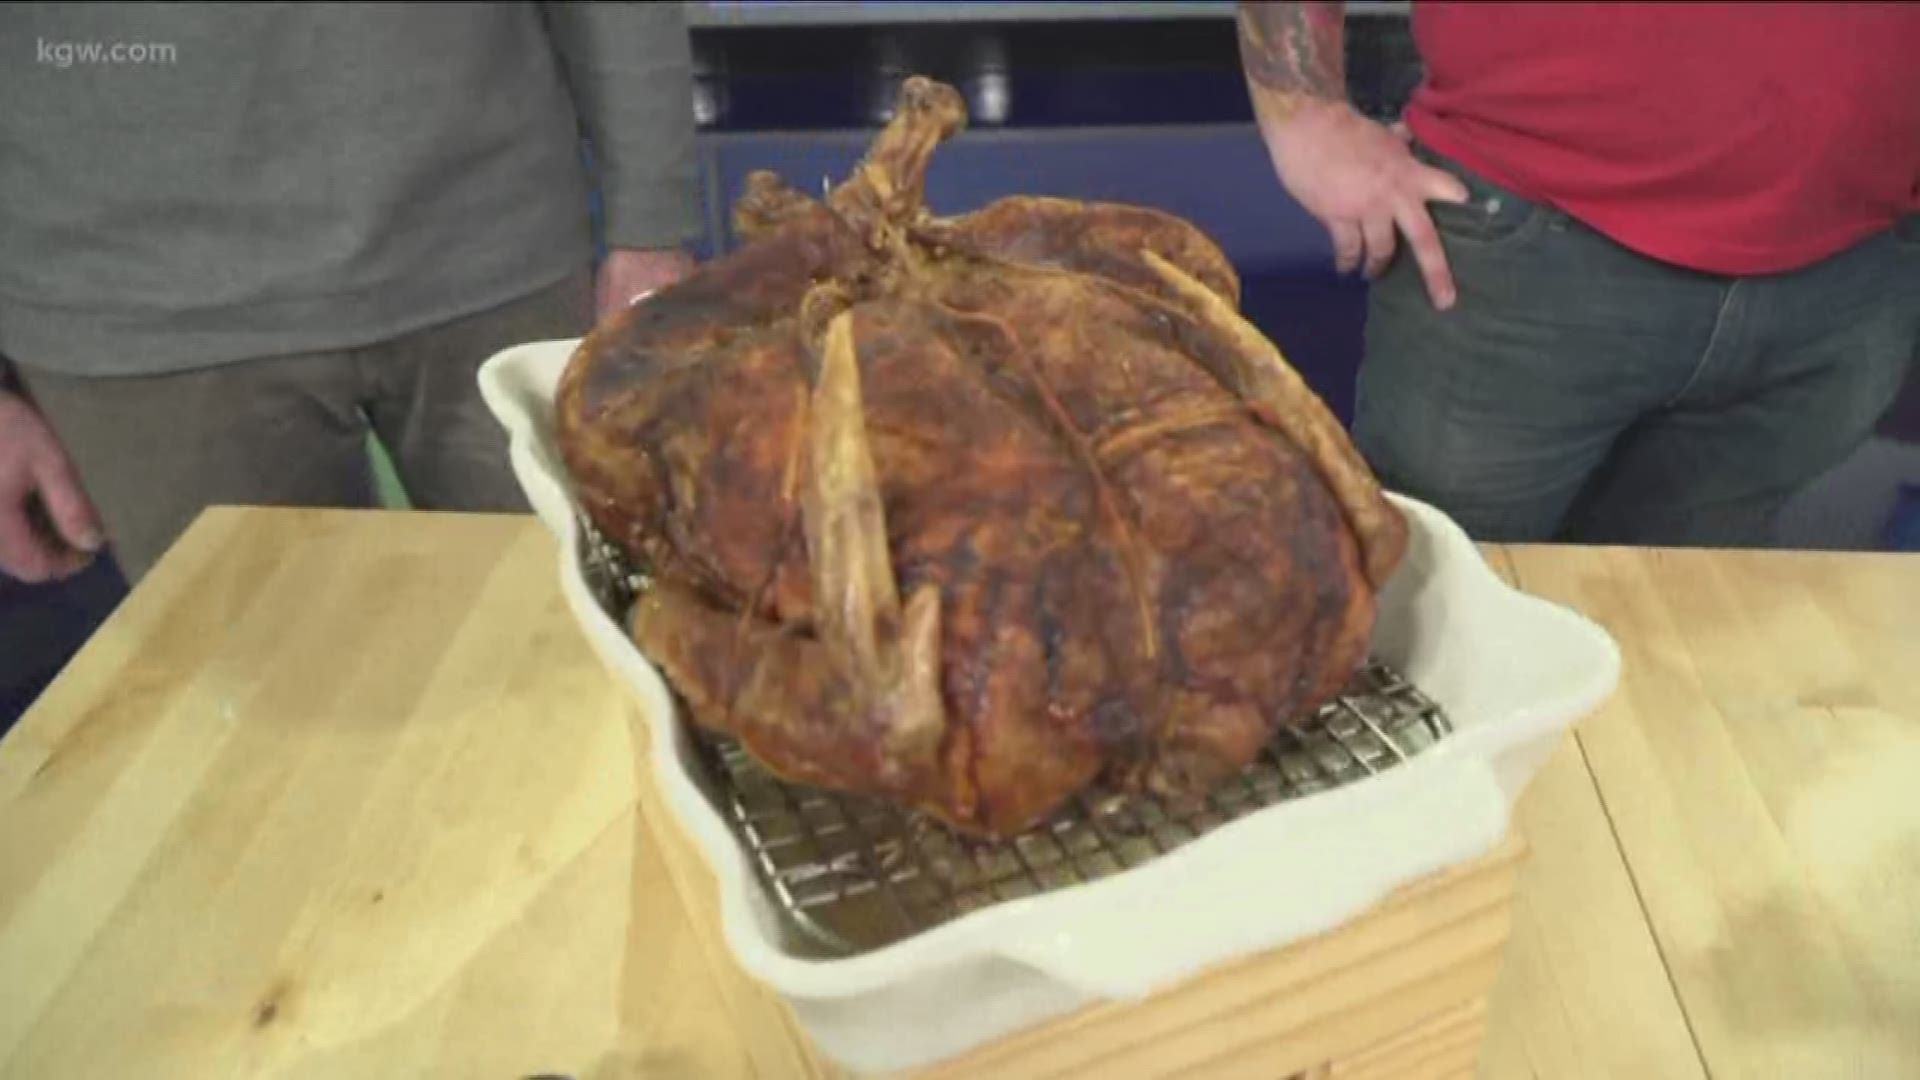 The Waiting Room in NW Portland is offering their turducken Thanksgiving Dinner. Order by Nov. 16th to avoid having to do the cooking yourself.
thewaitingroompdx.com
#TonightwithCassidy